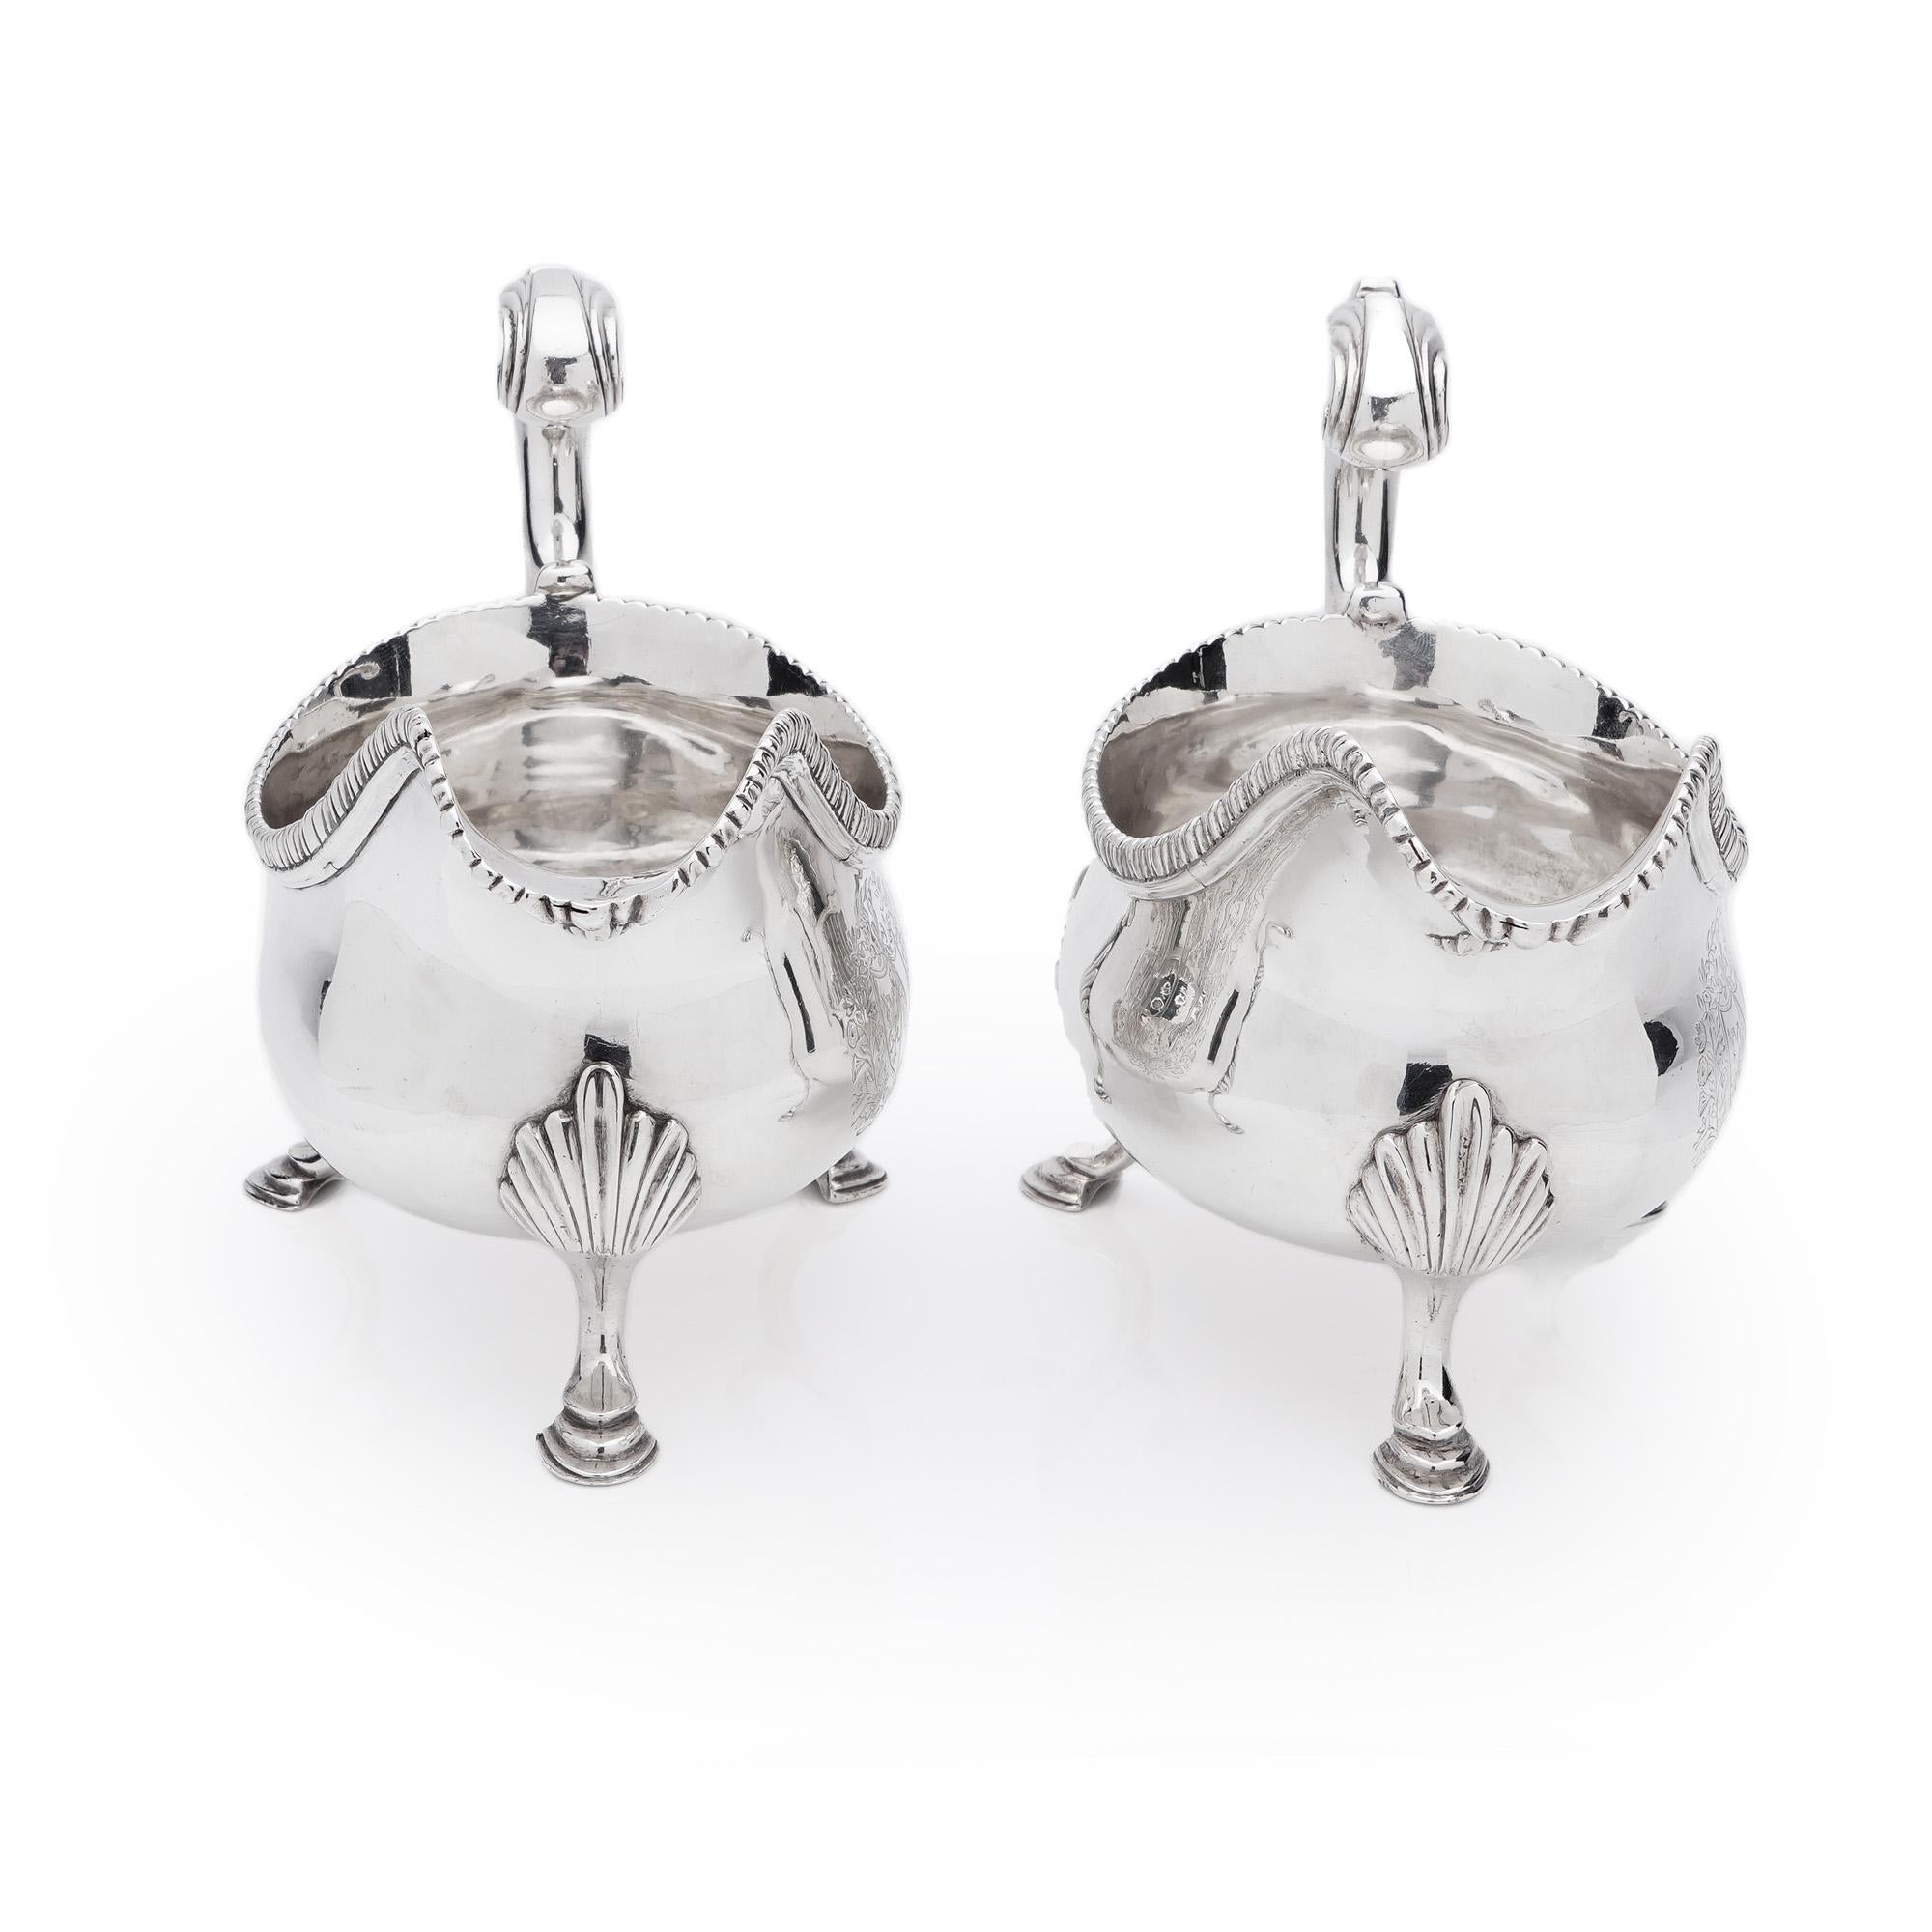 British Antique George III Sterling Silver Pair of Sauce Boats with Coat of Arms For Sale